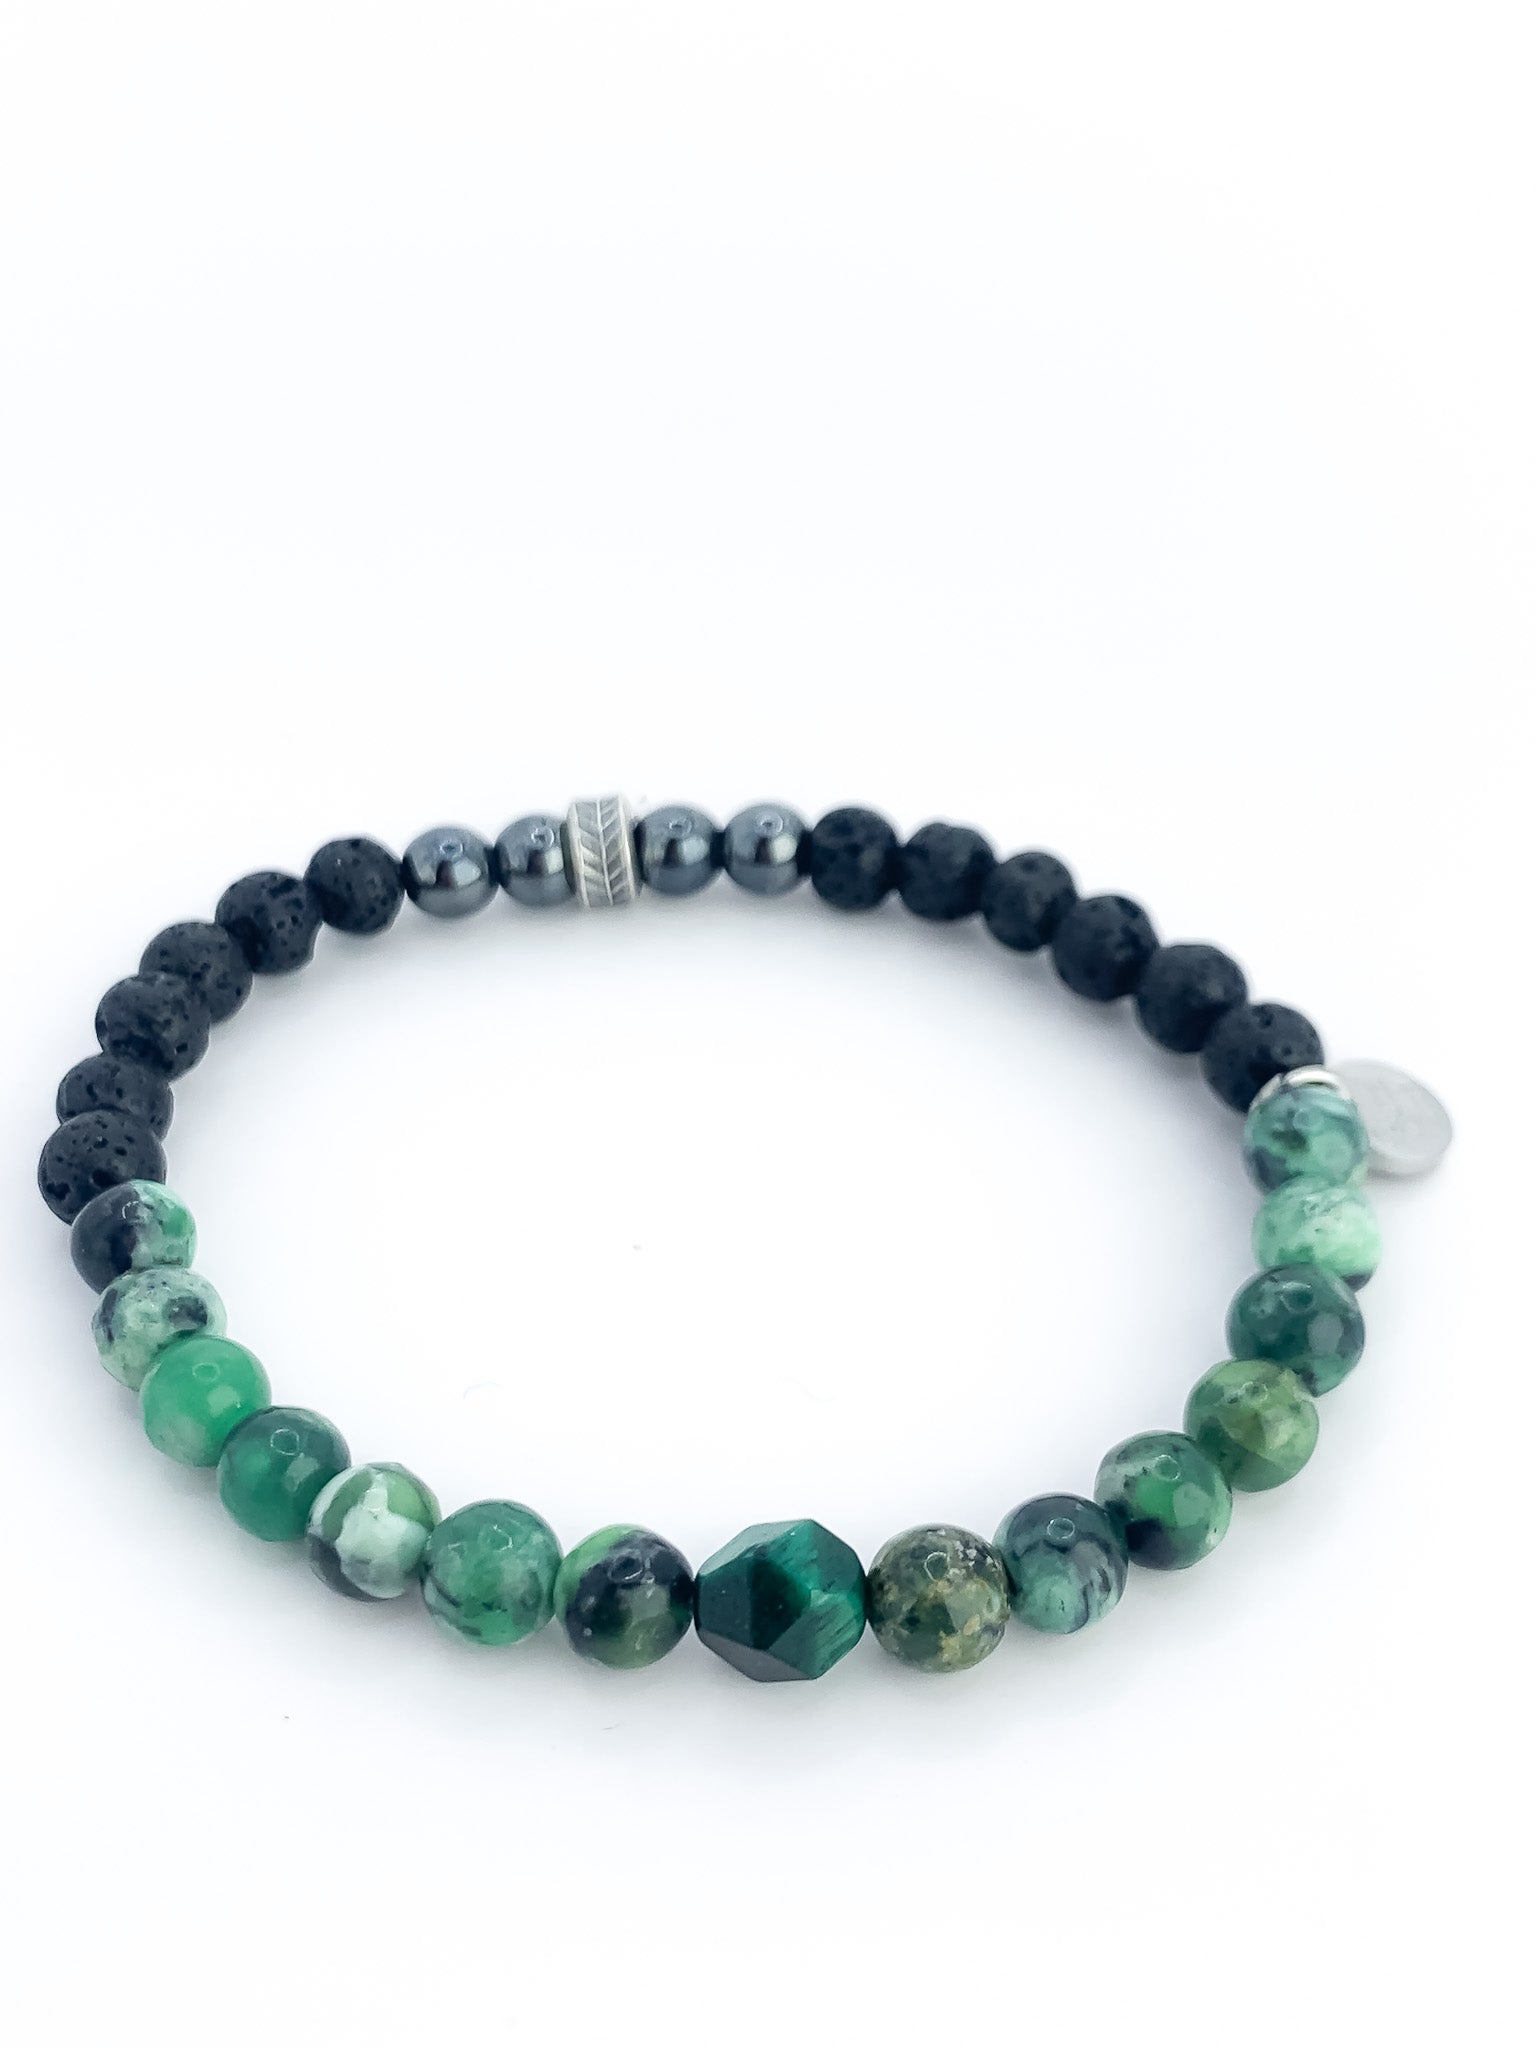 MEN'S Collection - African Turquoise , GreenTiger Eye Pepite,  Lava, Hematite and Sterling Silver Bracelet